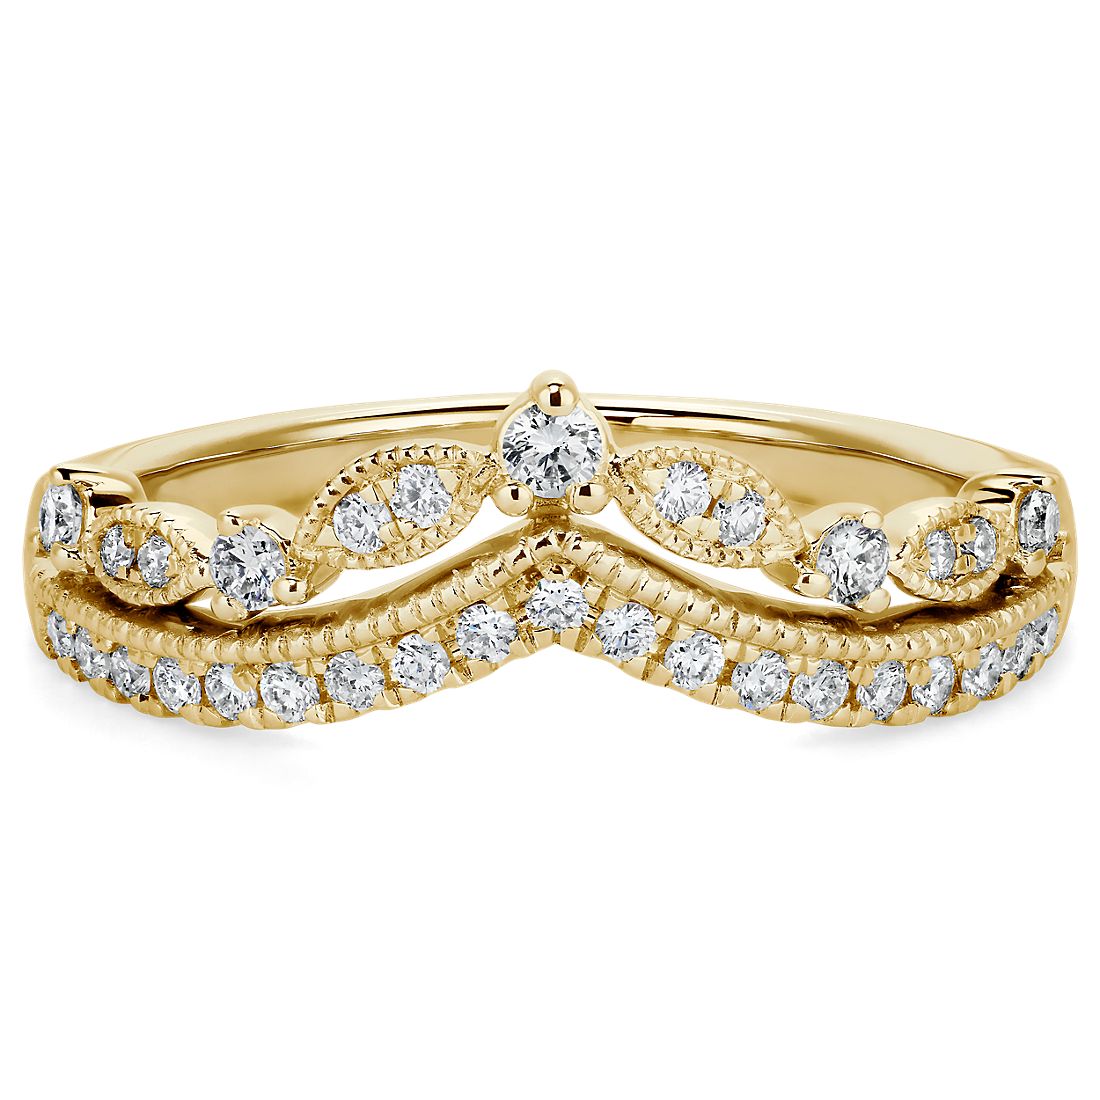 Regal Curved Diamond Ring in 18k Yellow Gold (1/4 ct. tw.)